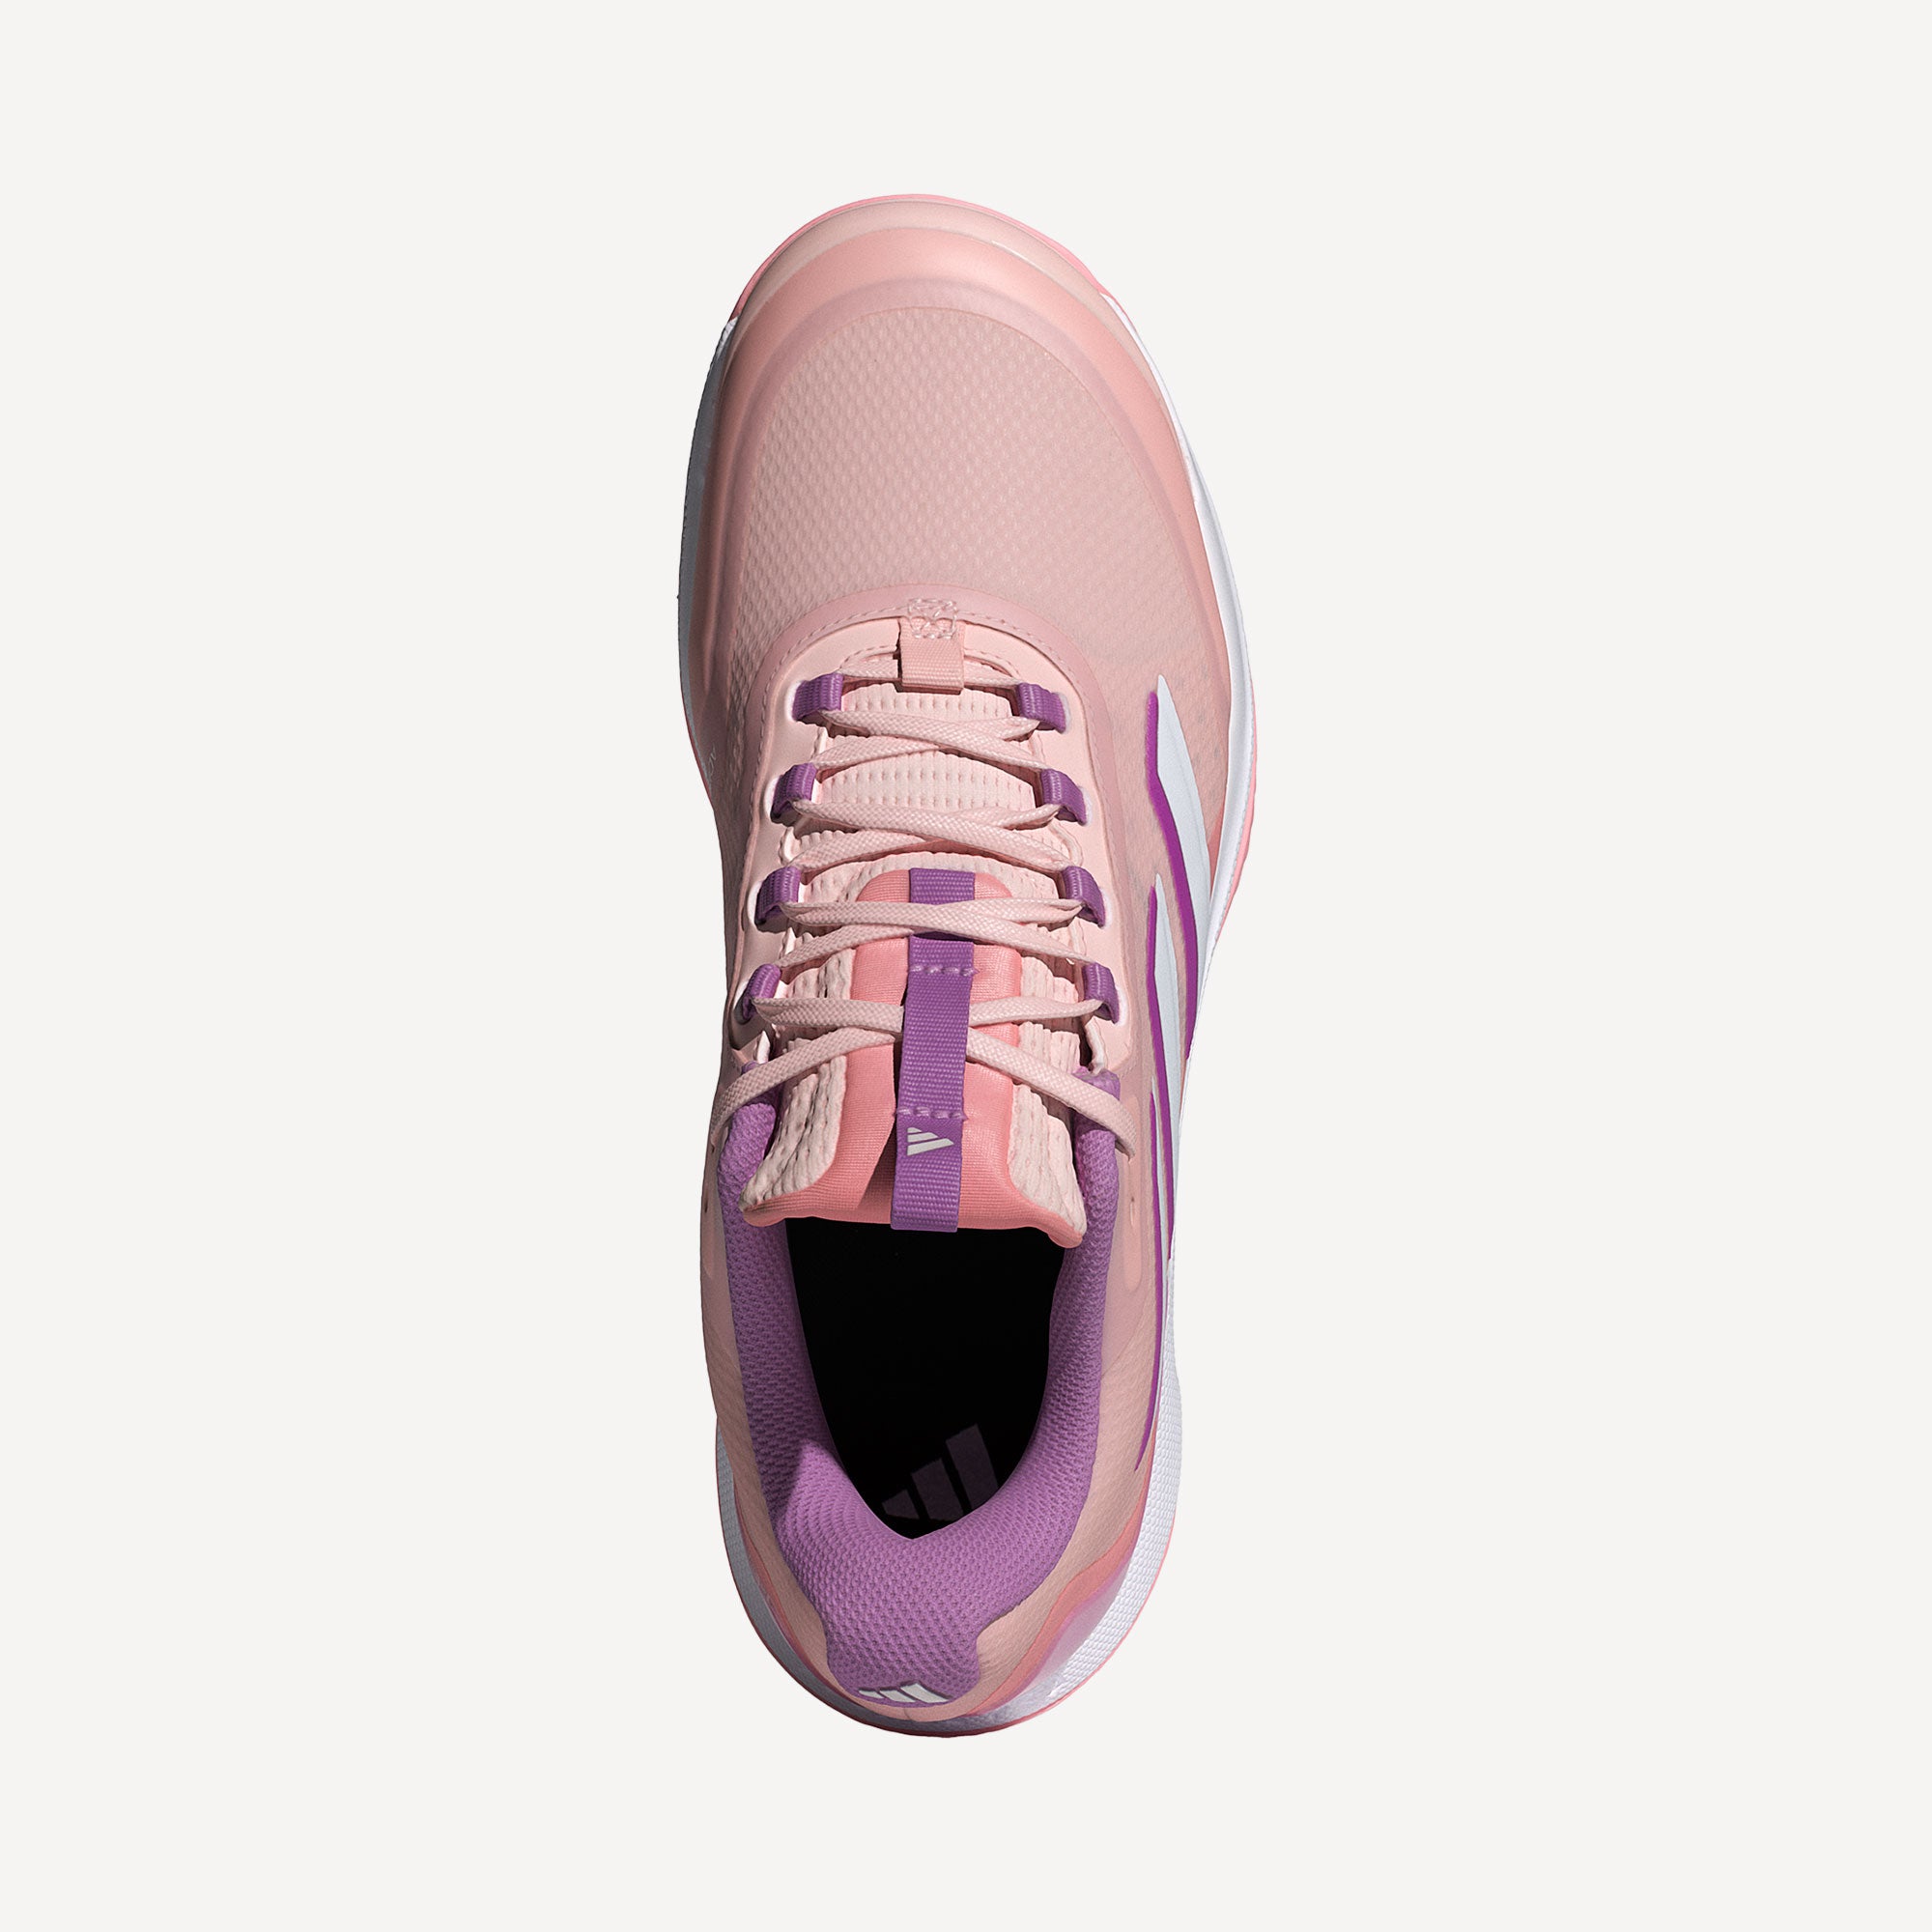 adidas Avacourt 2 Women's Clay Court Tennis Shoes - Pink (4)